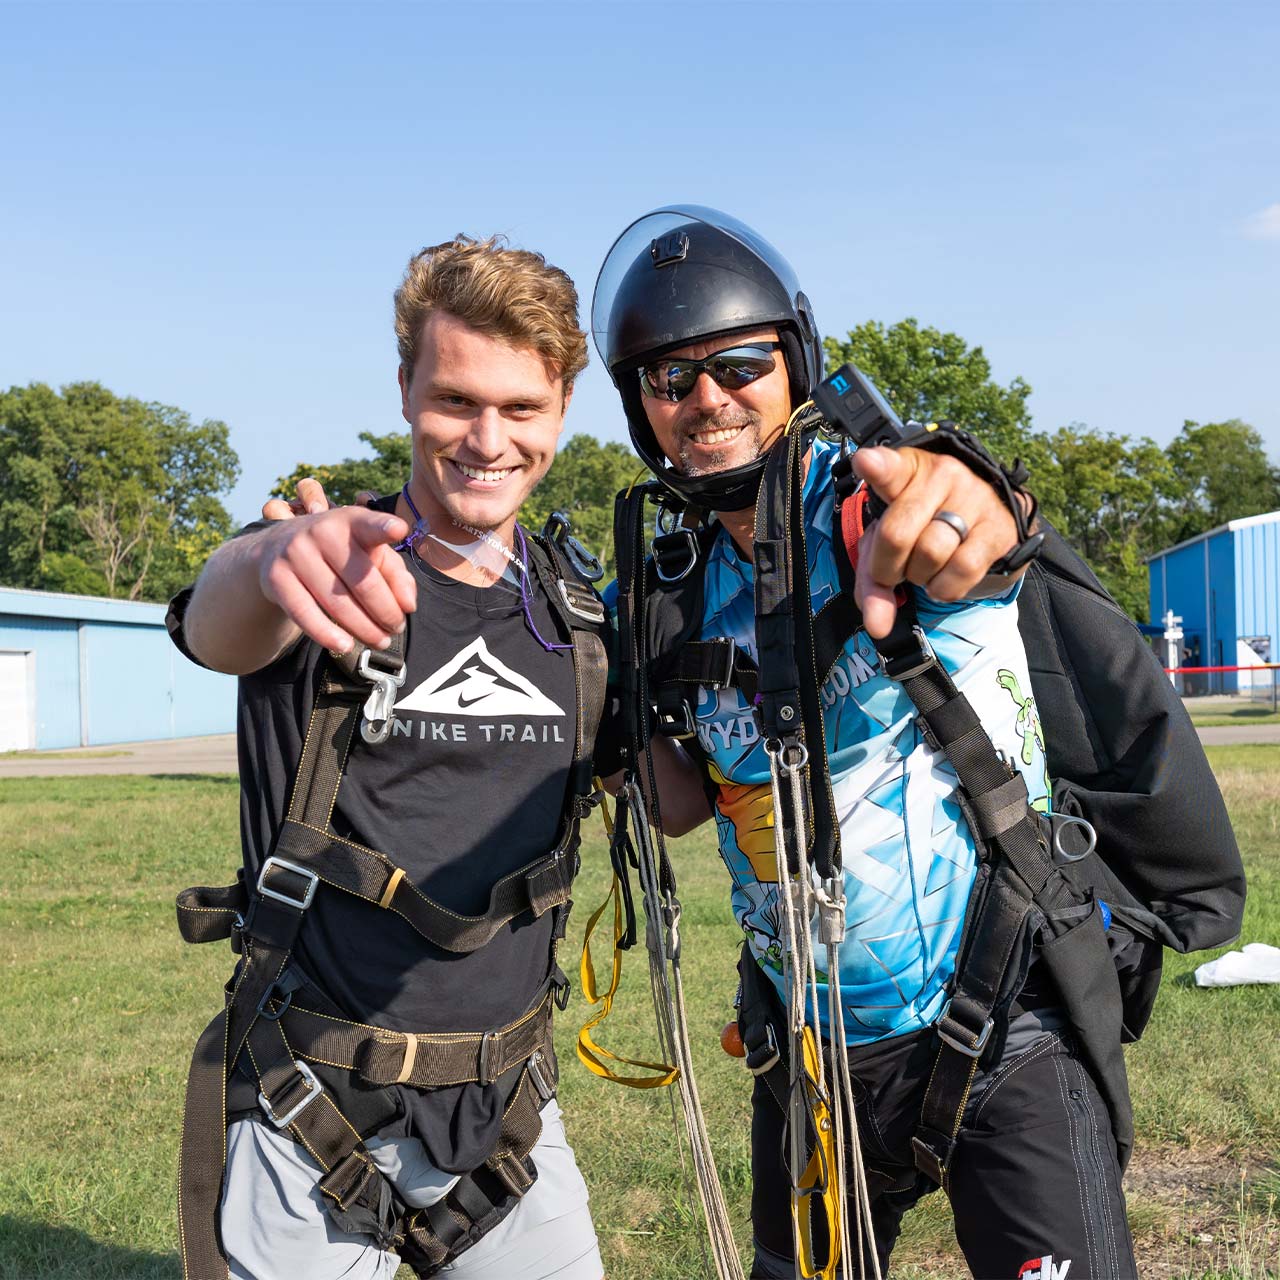 Shortly after landing from skydiving in Dayton a tandem instructor and student smile and pose for a photo